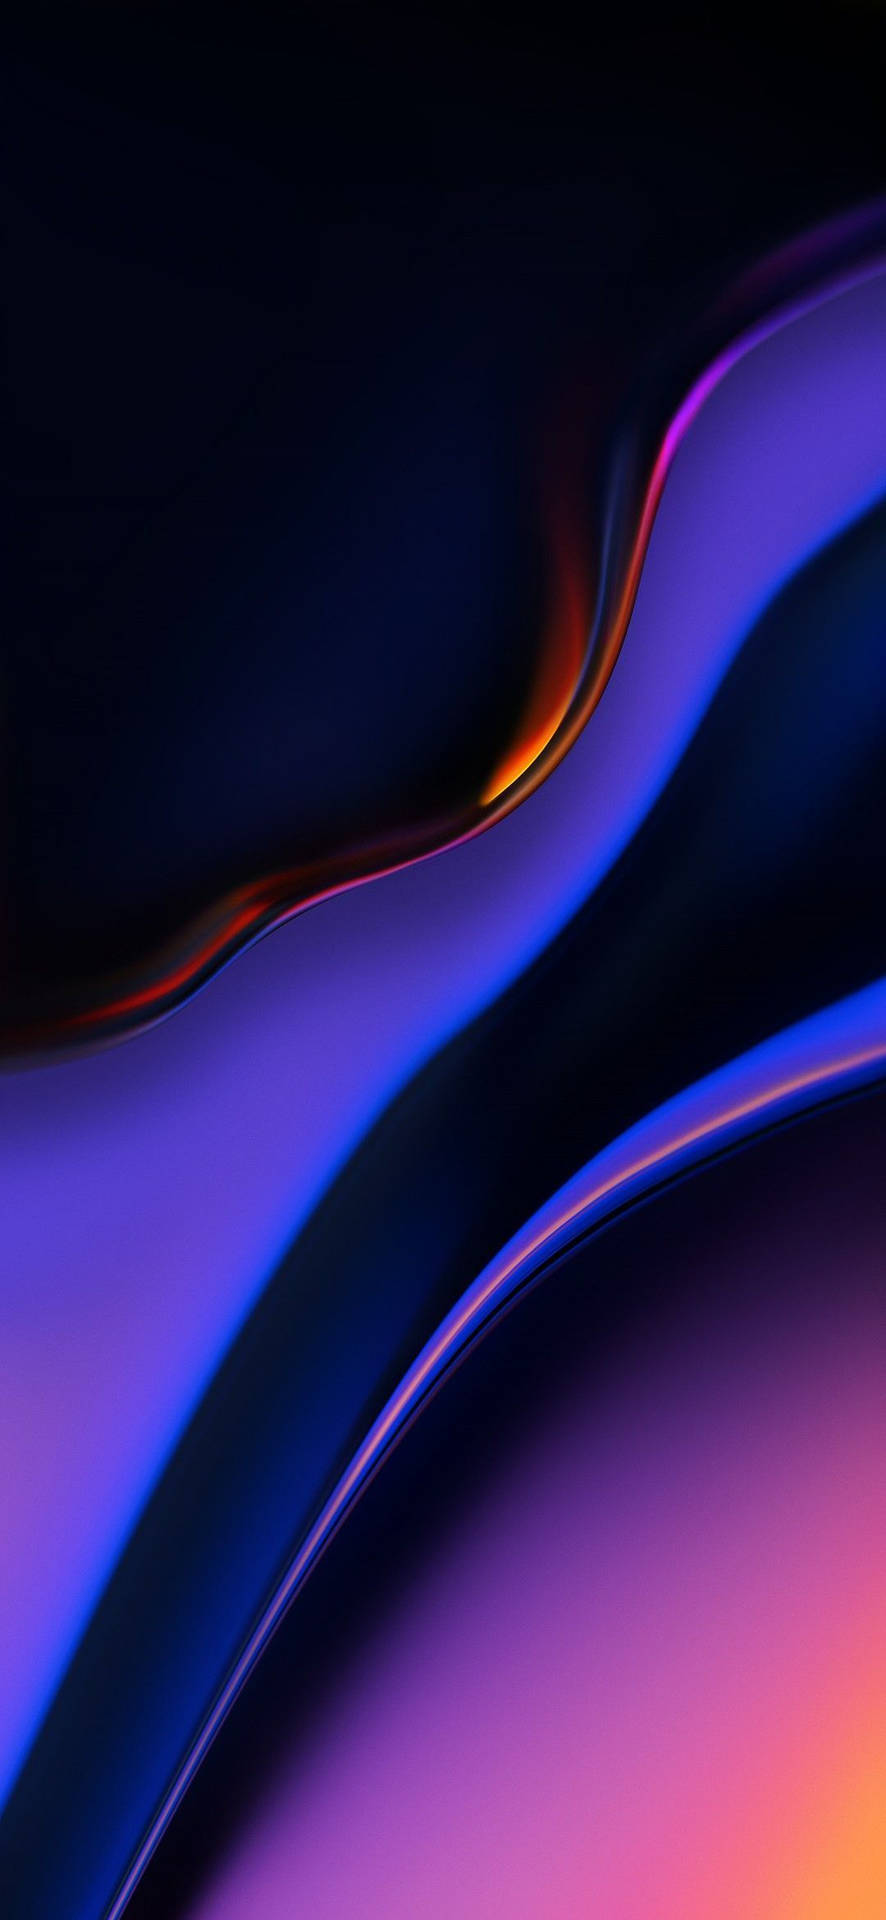 Samsung Mobile Abstract Curves Wallpaper